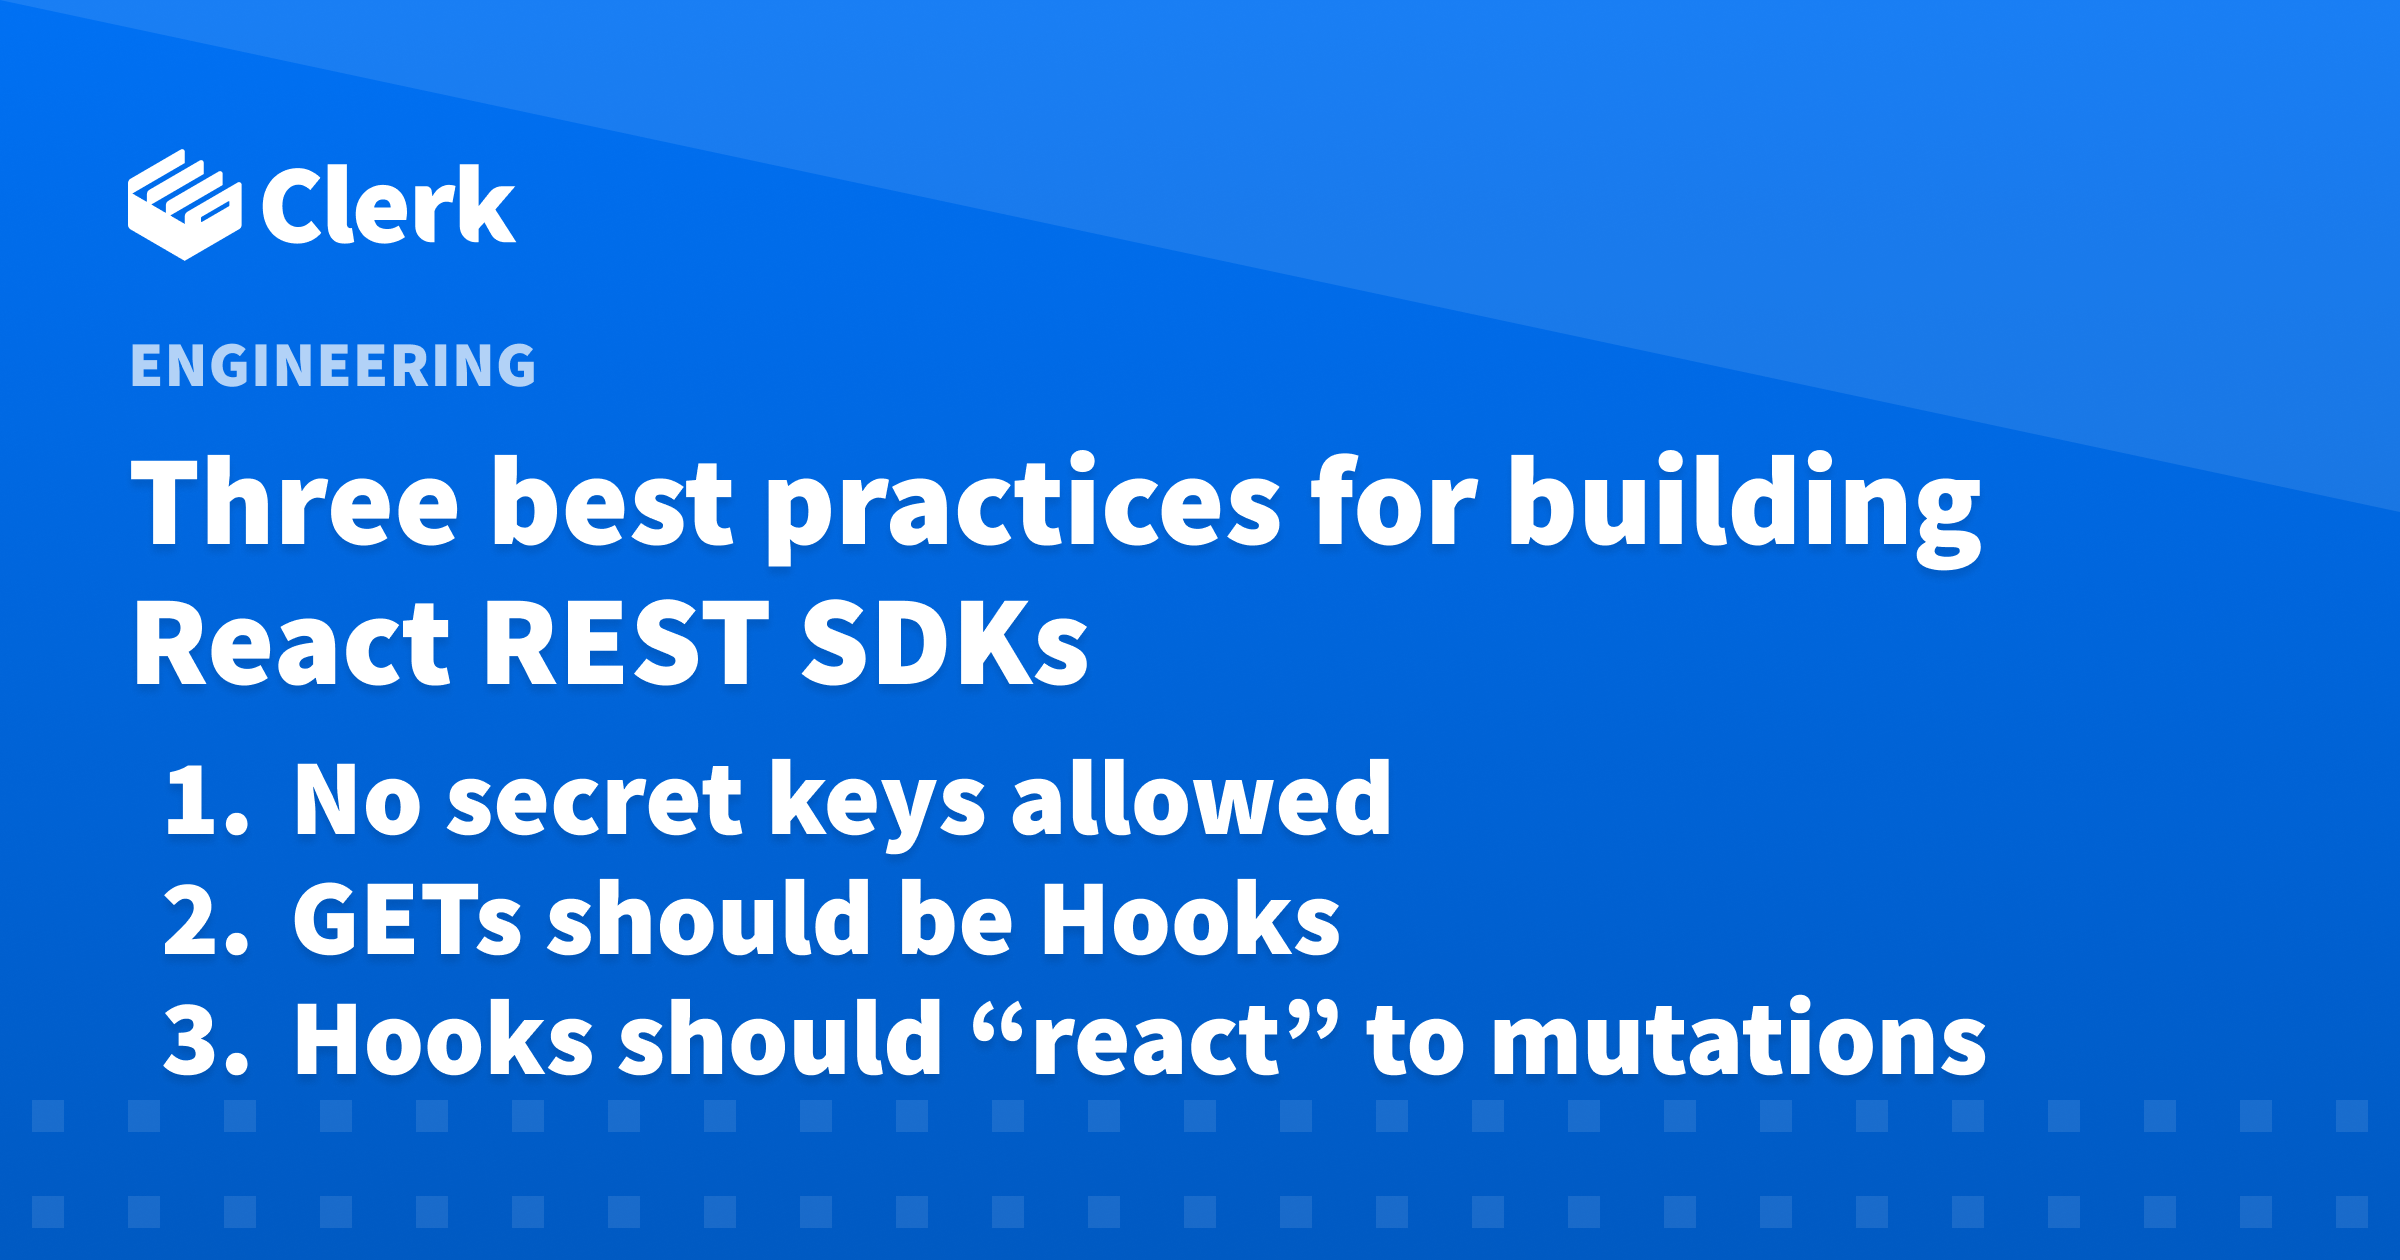 Three best practices for building React REST SDKs